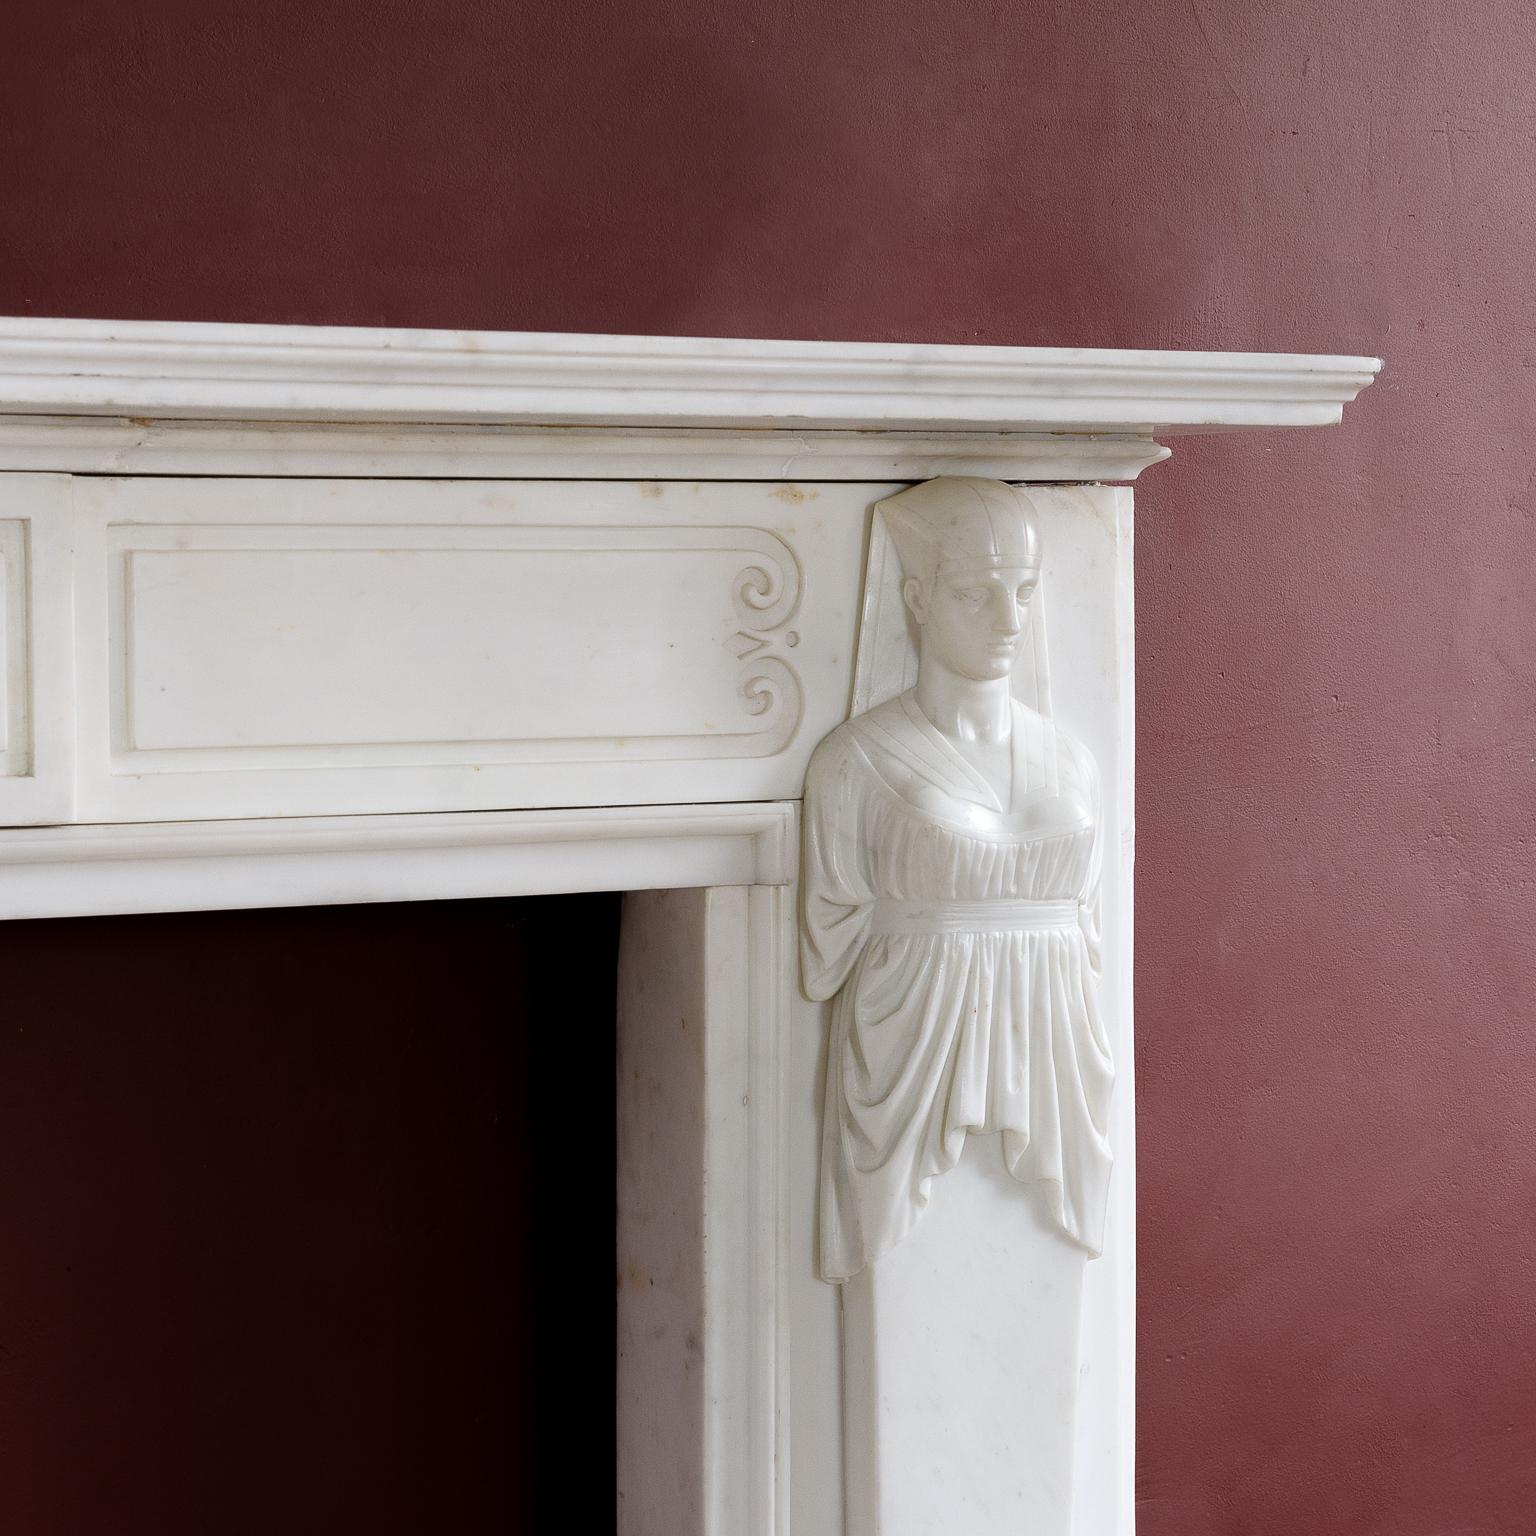 A fine Regency period Statuary marble fireplace in the Egyptian manner, the moulded shelf above frieze with incised channel-moulded decoration and central plaque, the caryatid jambs depicting Egyptian Goddess Isis, raised on footblocks. Fine quality